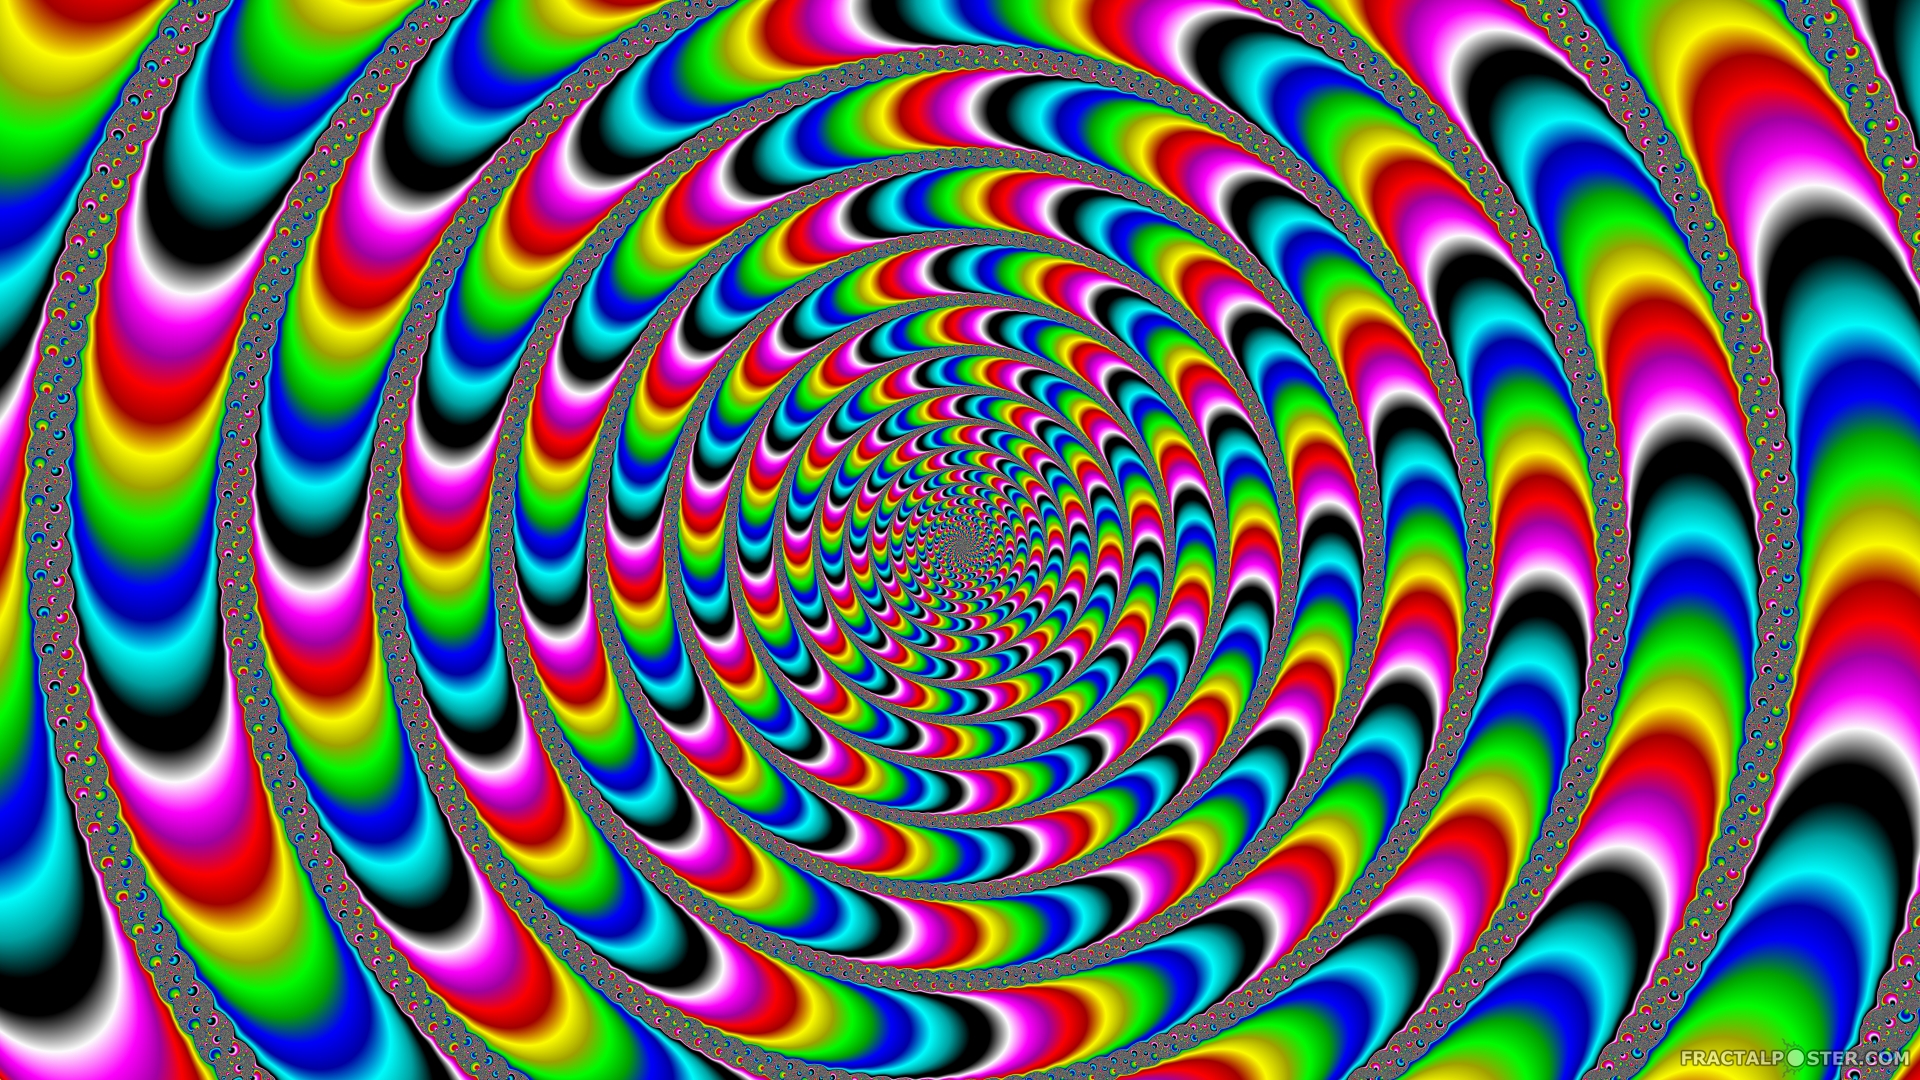 pictures that make you dizzy